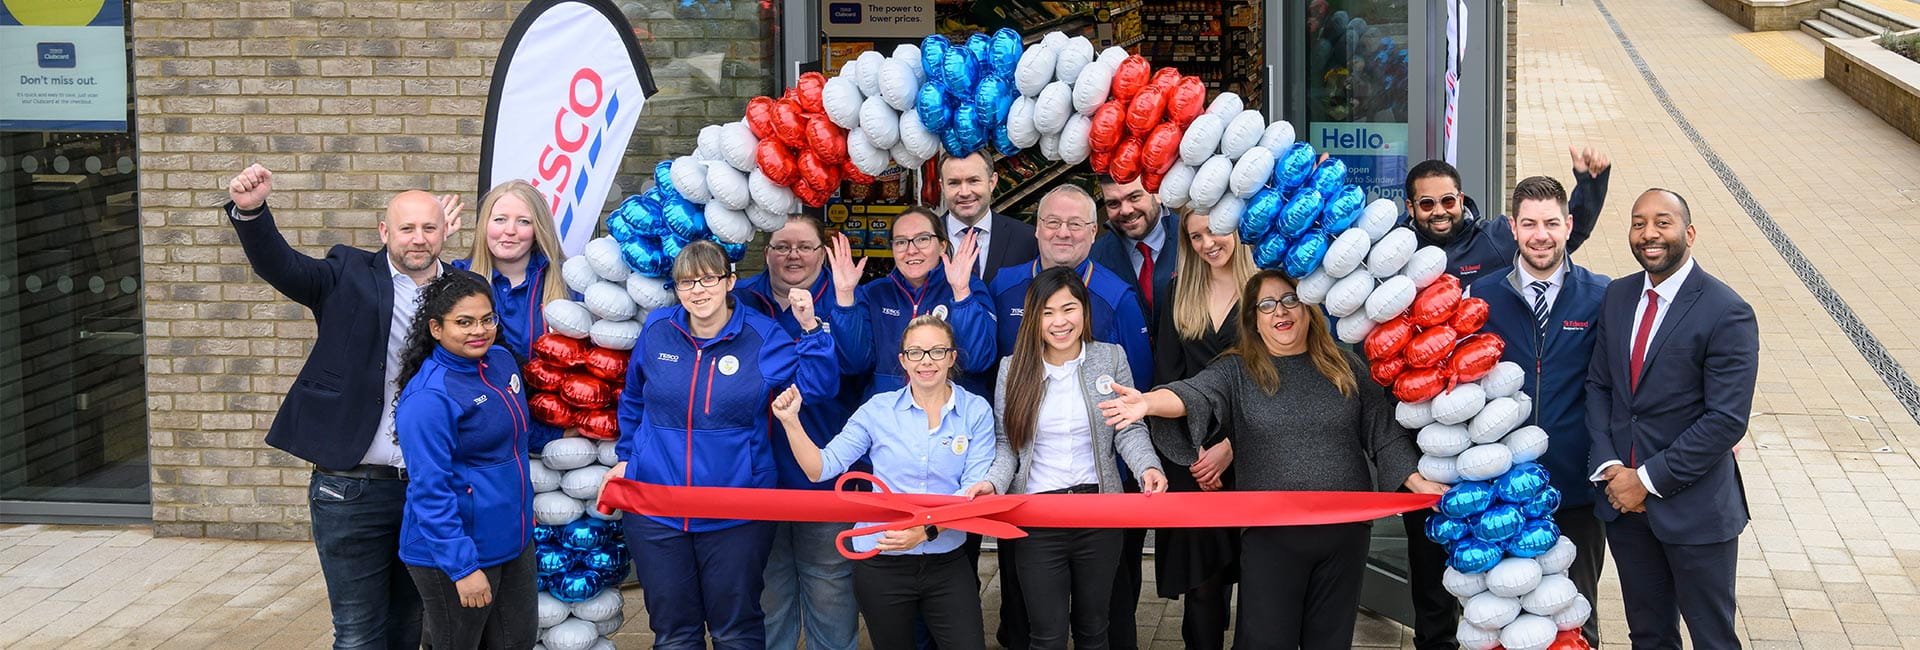 Image of St Edward staff with Tesco Express staff